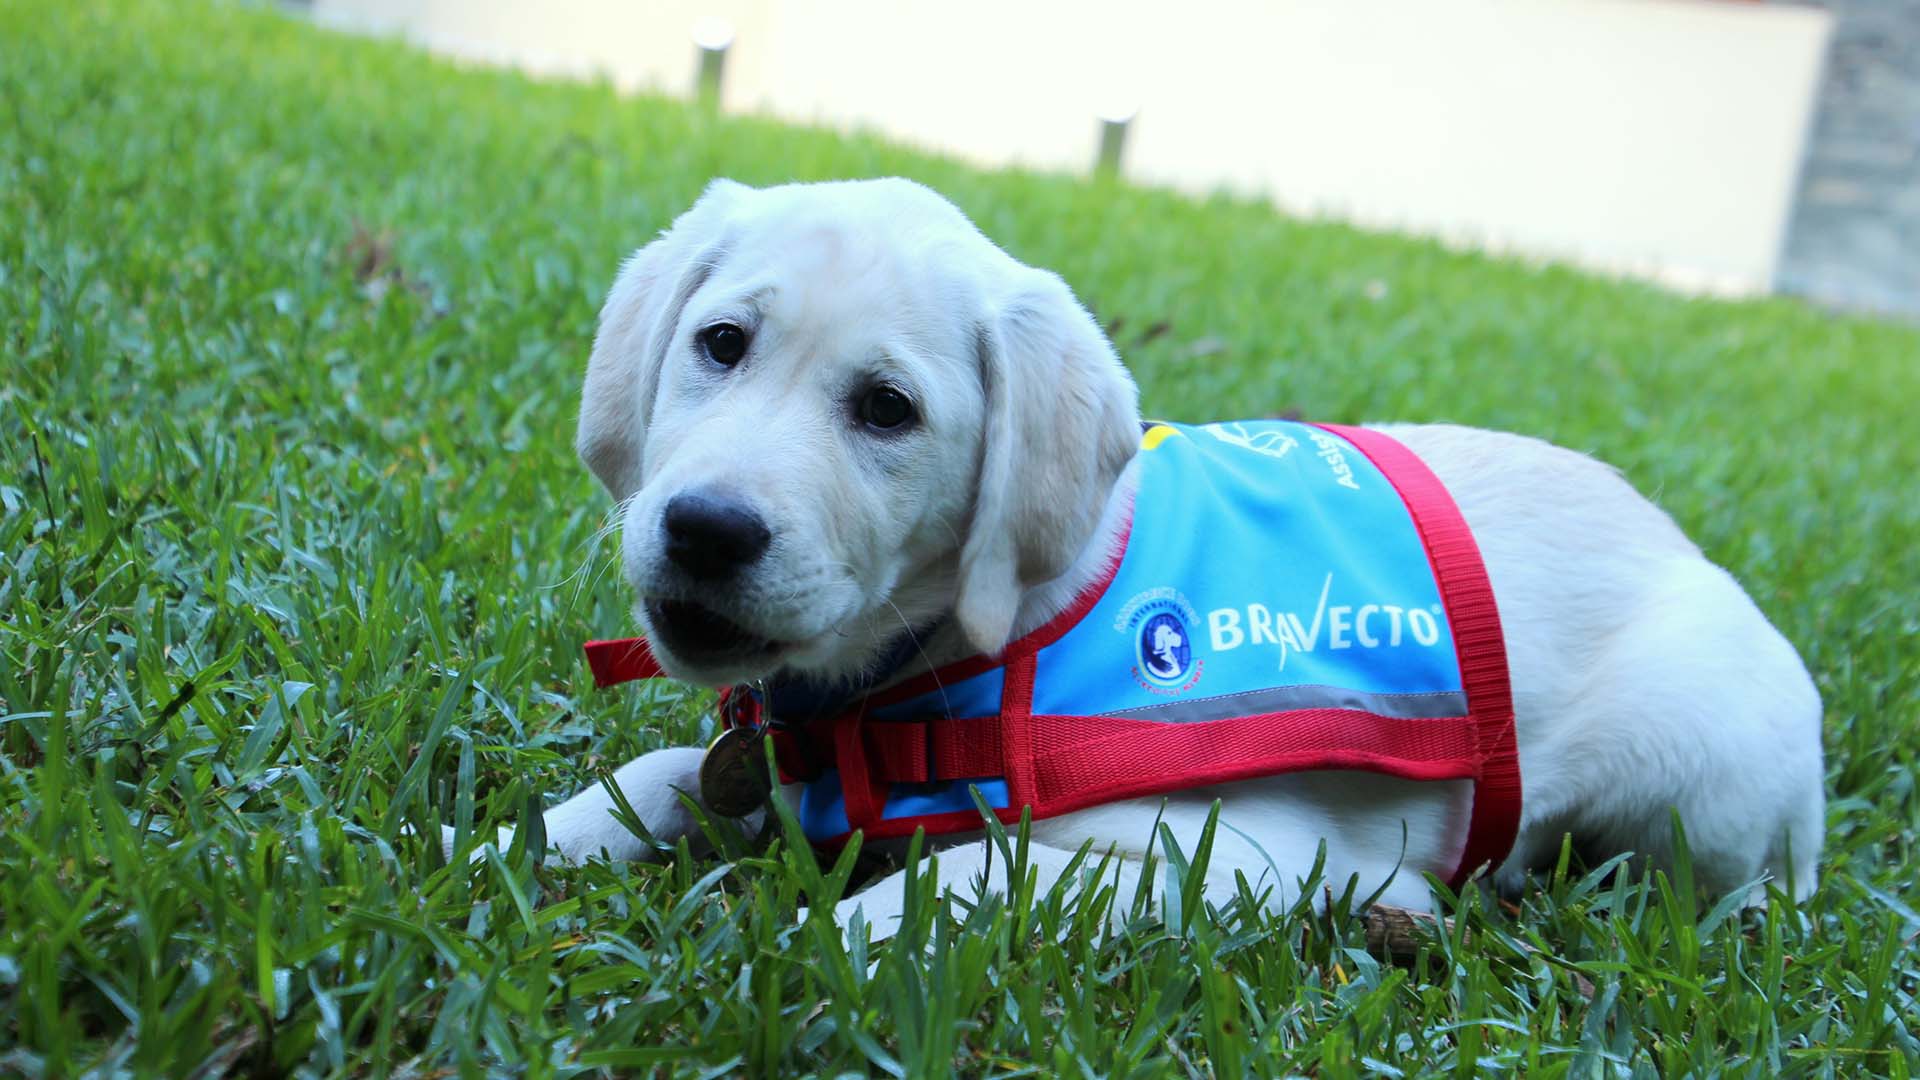 Assistance Dogs Australia Wants You To Name One of Its Super Cute Puppies